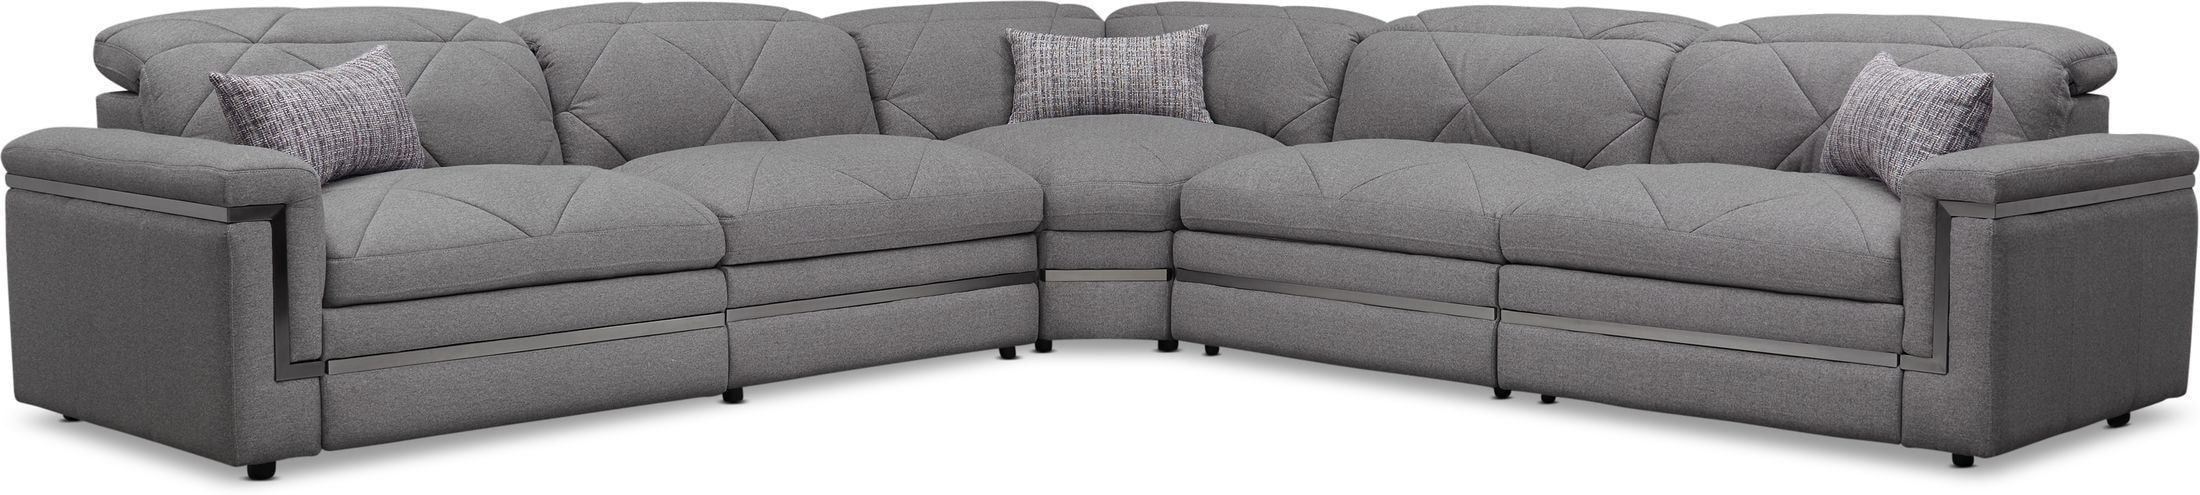 Revel 5 Piece Dual Power Reclining Sectional With 3 Pertaining To Forte Gray Power Reclining Sofas (View 6 of 15)